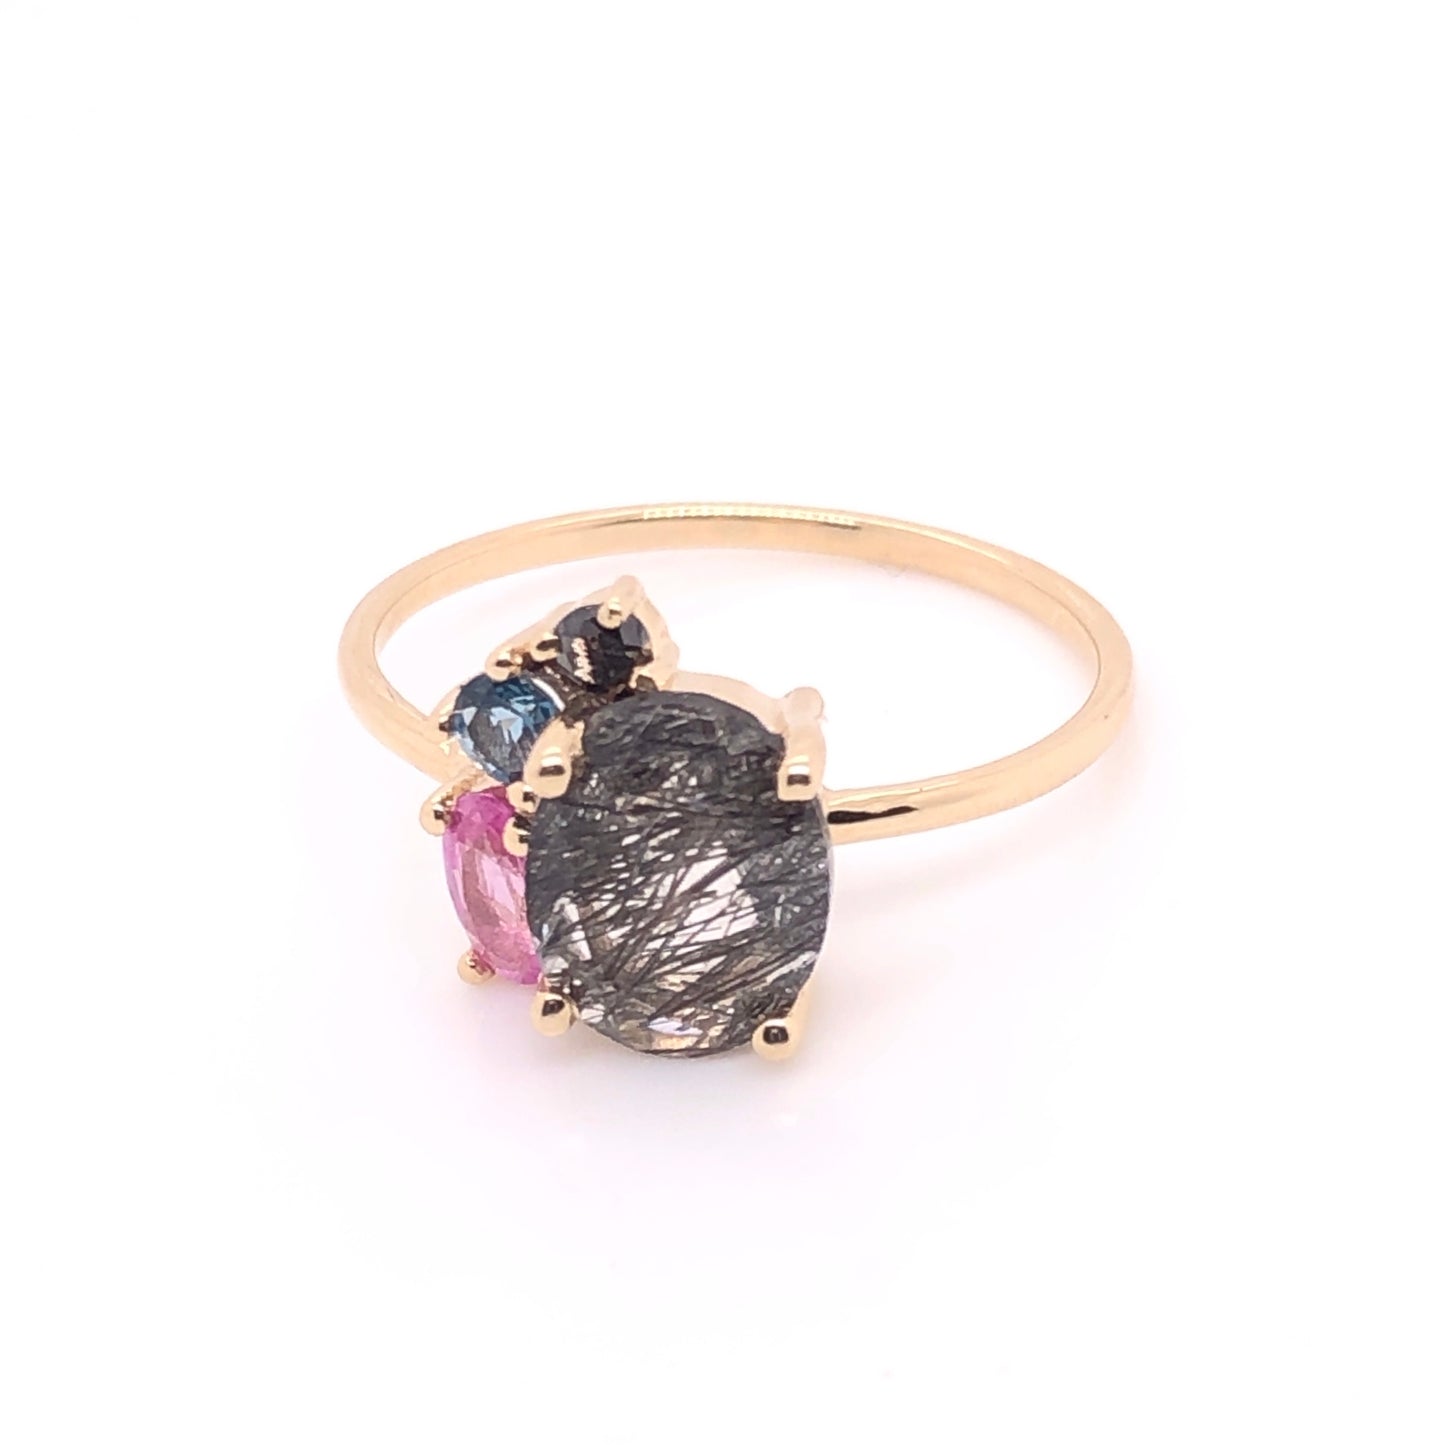 IMMEDIATE DELIVERY / Rutilated Quartz Ring with Black Diamond, London Blue Topaz and Pink Sapphire / 14k Yellow Gold / Size 7.75